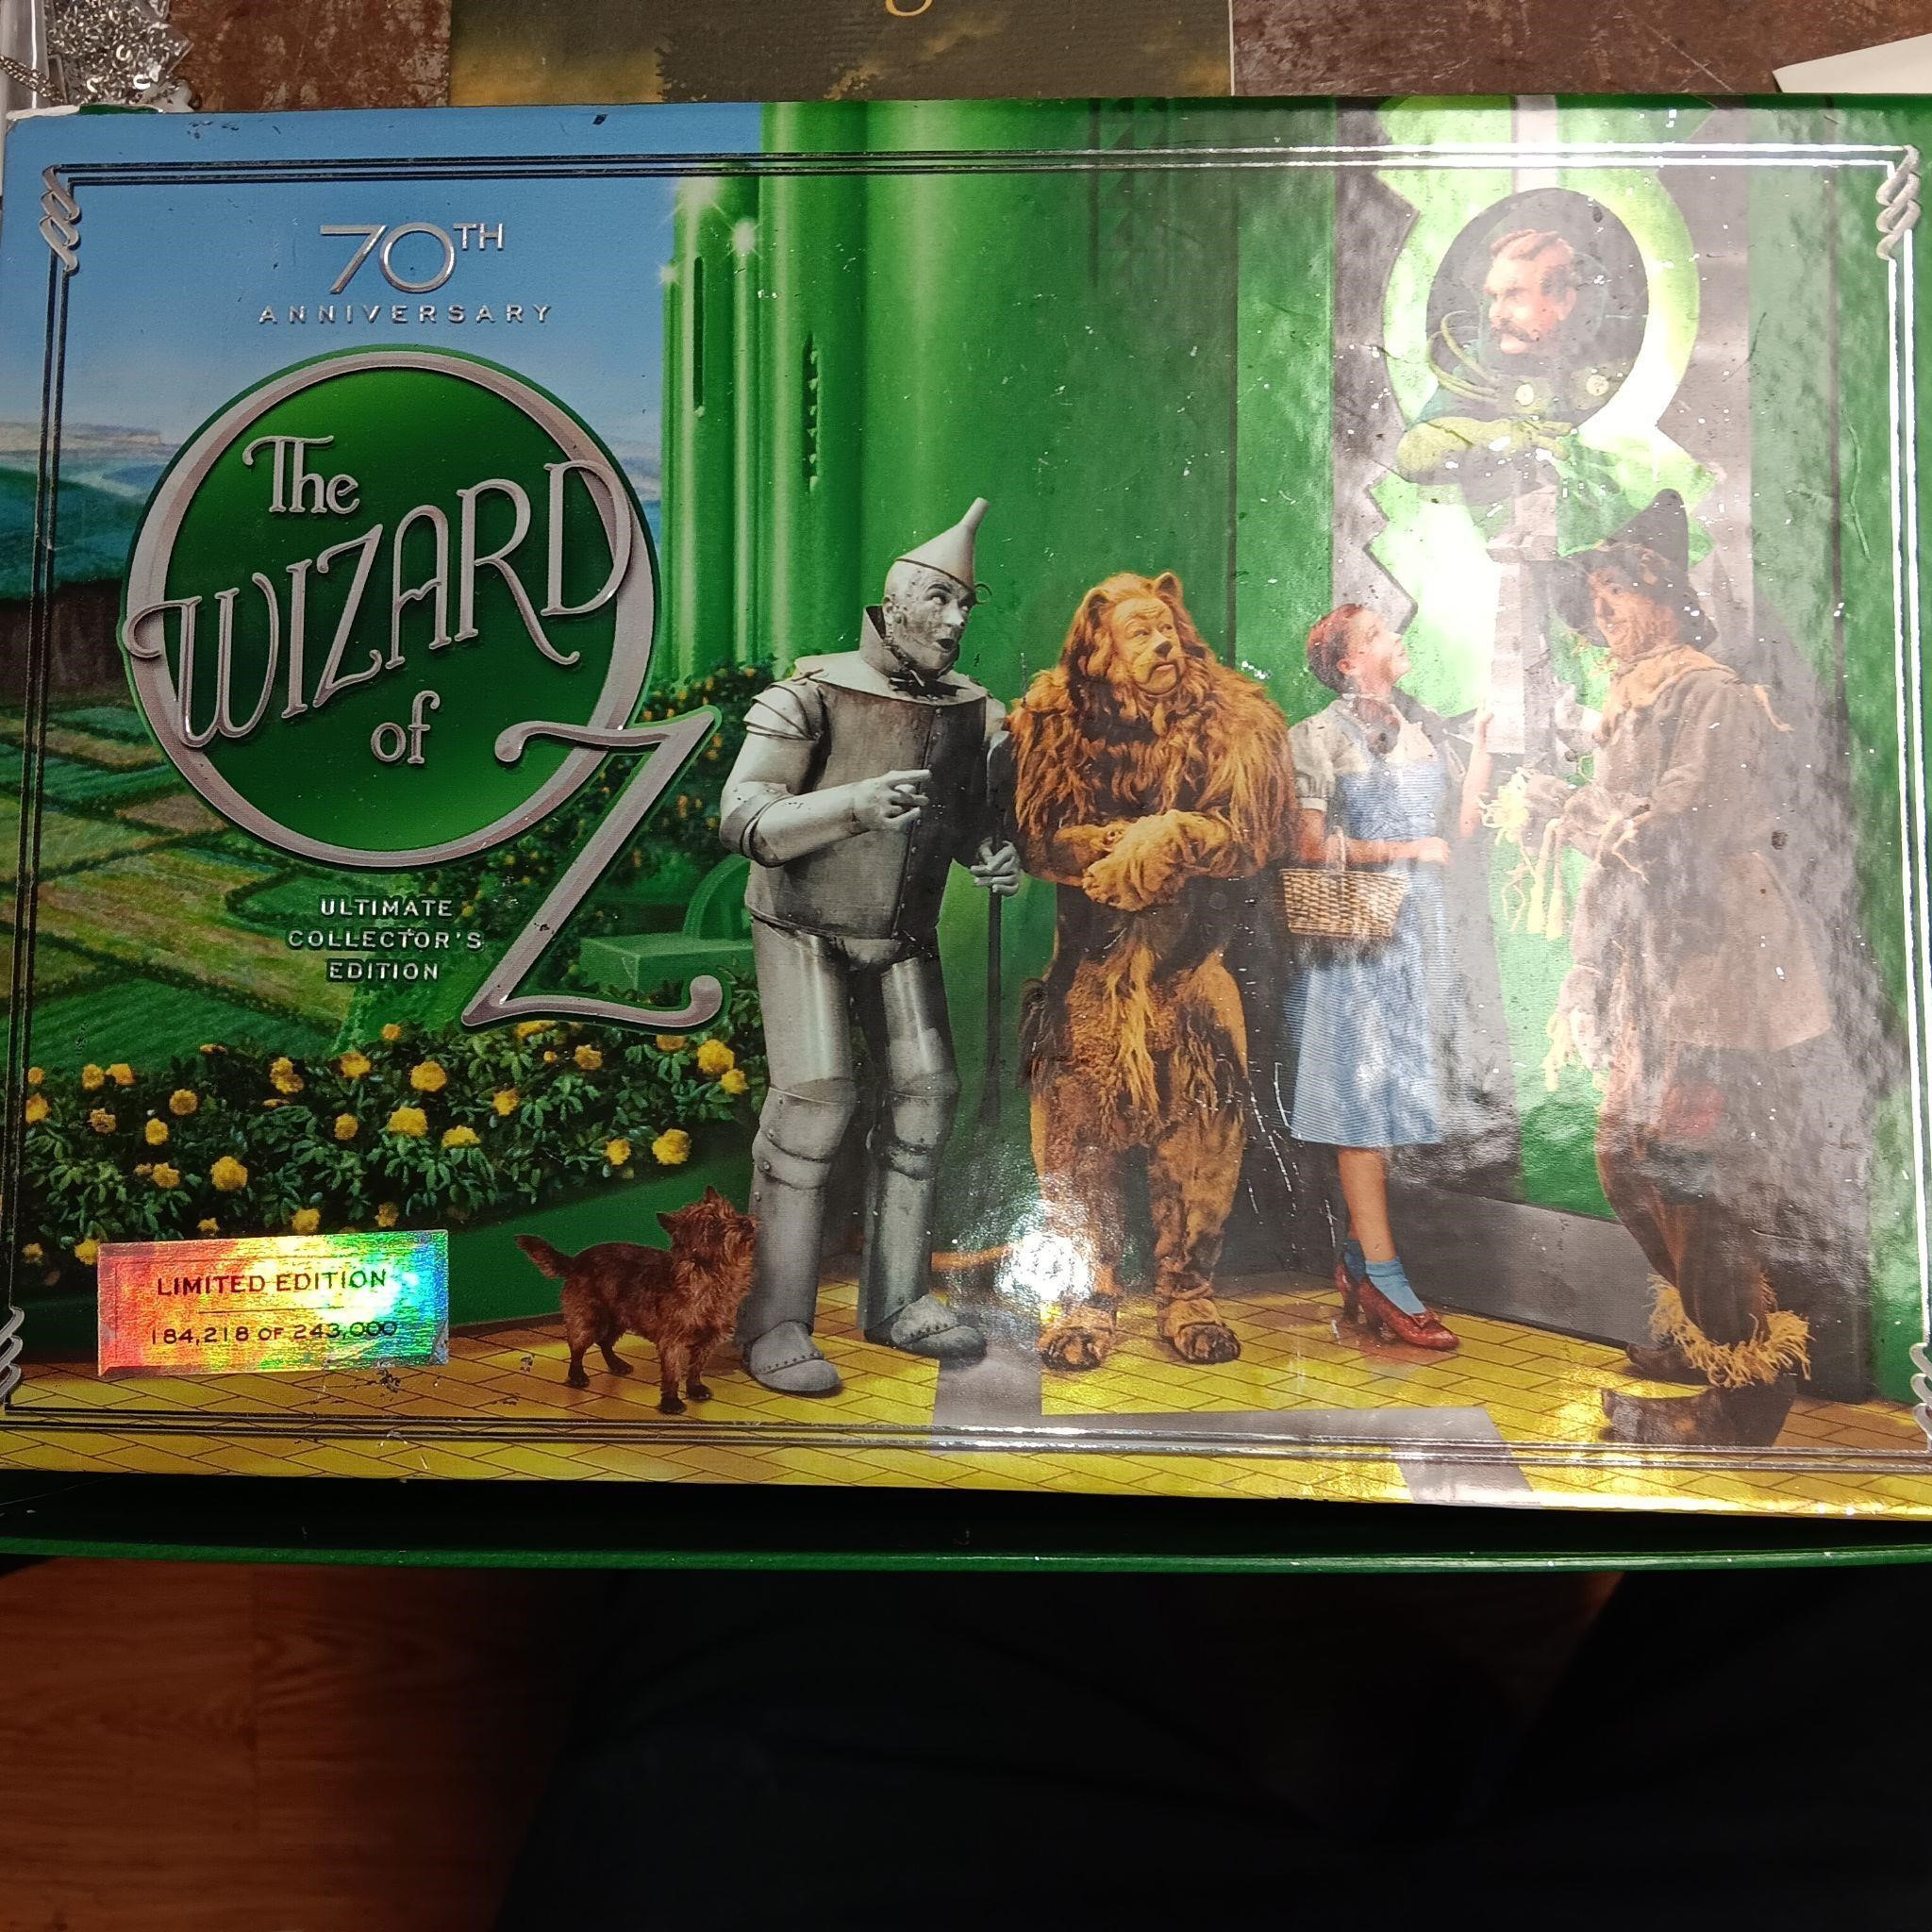 70th Anniversary Wizard of Oz Collection